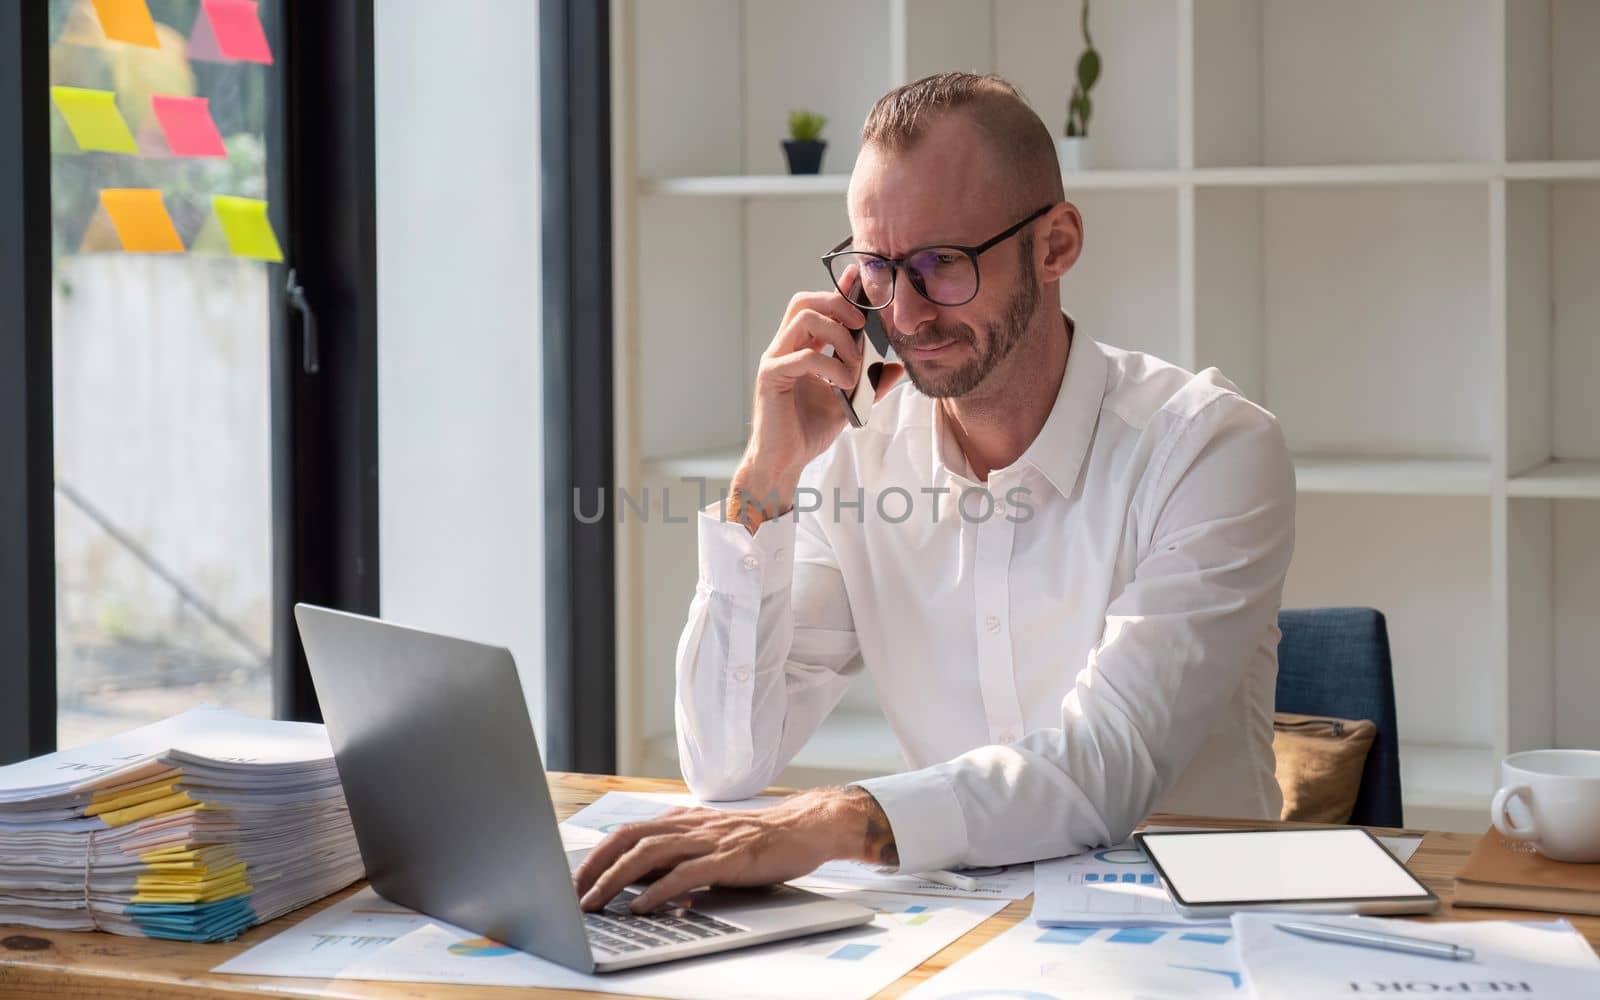 Businessman wearing glasses talking on phone, sitting at desk with laptop at office.